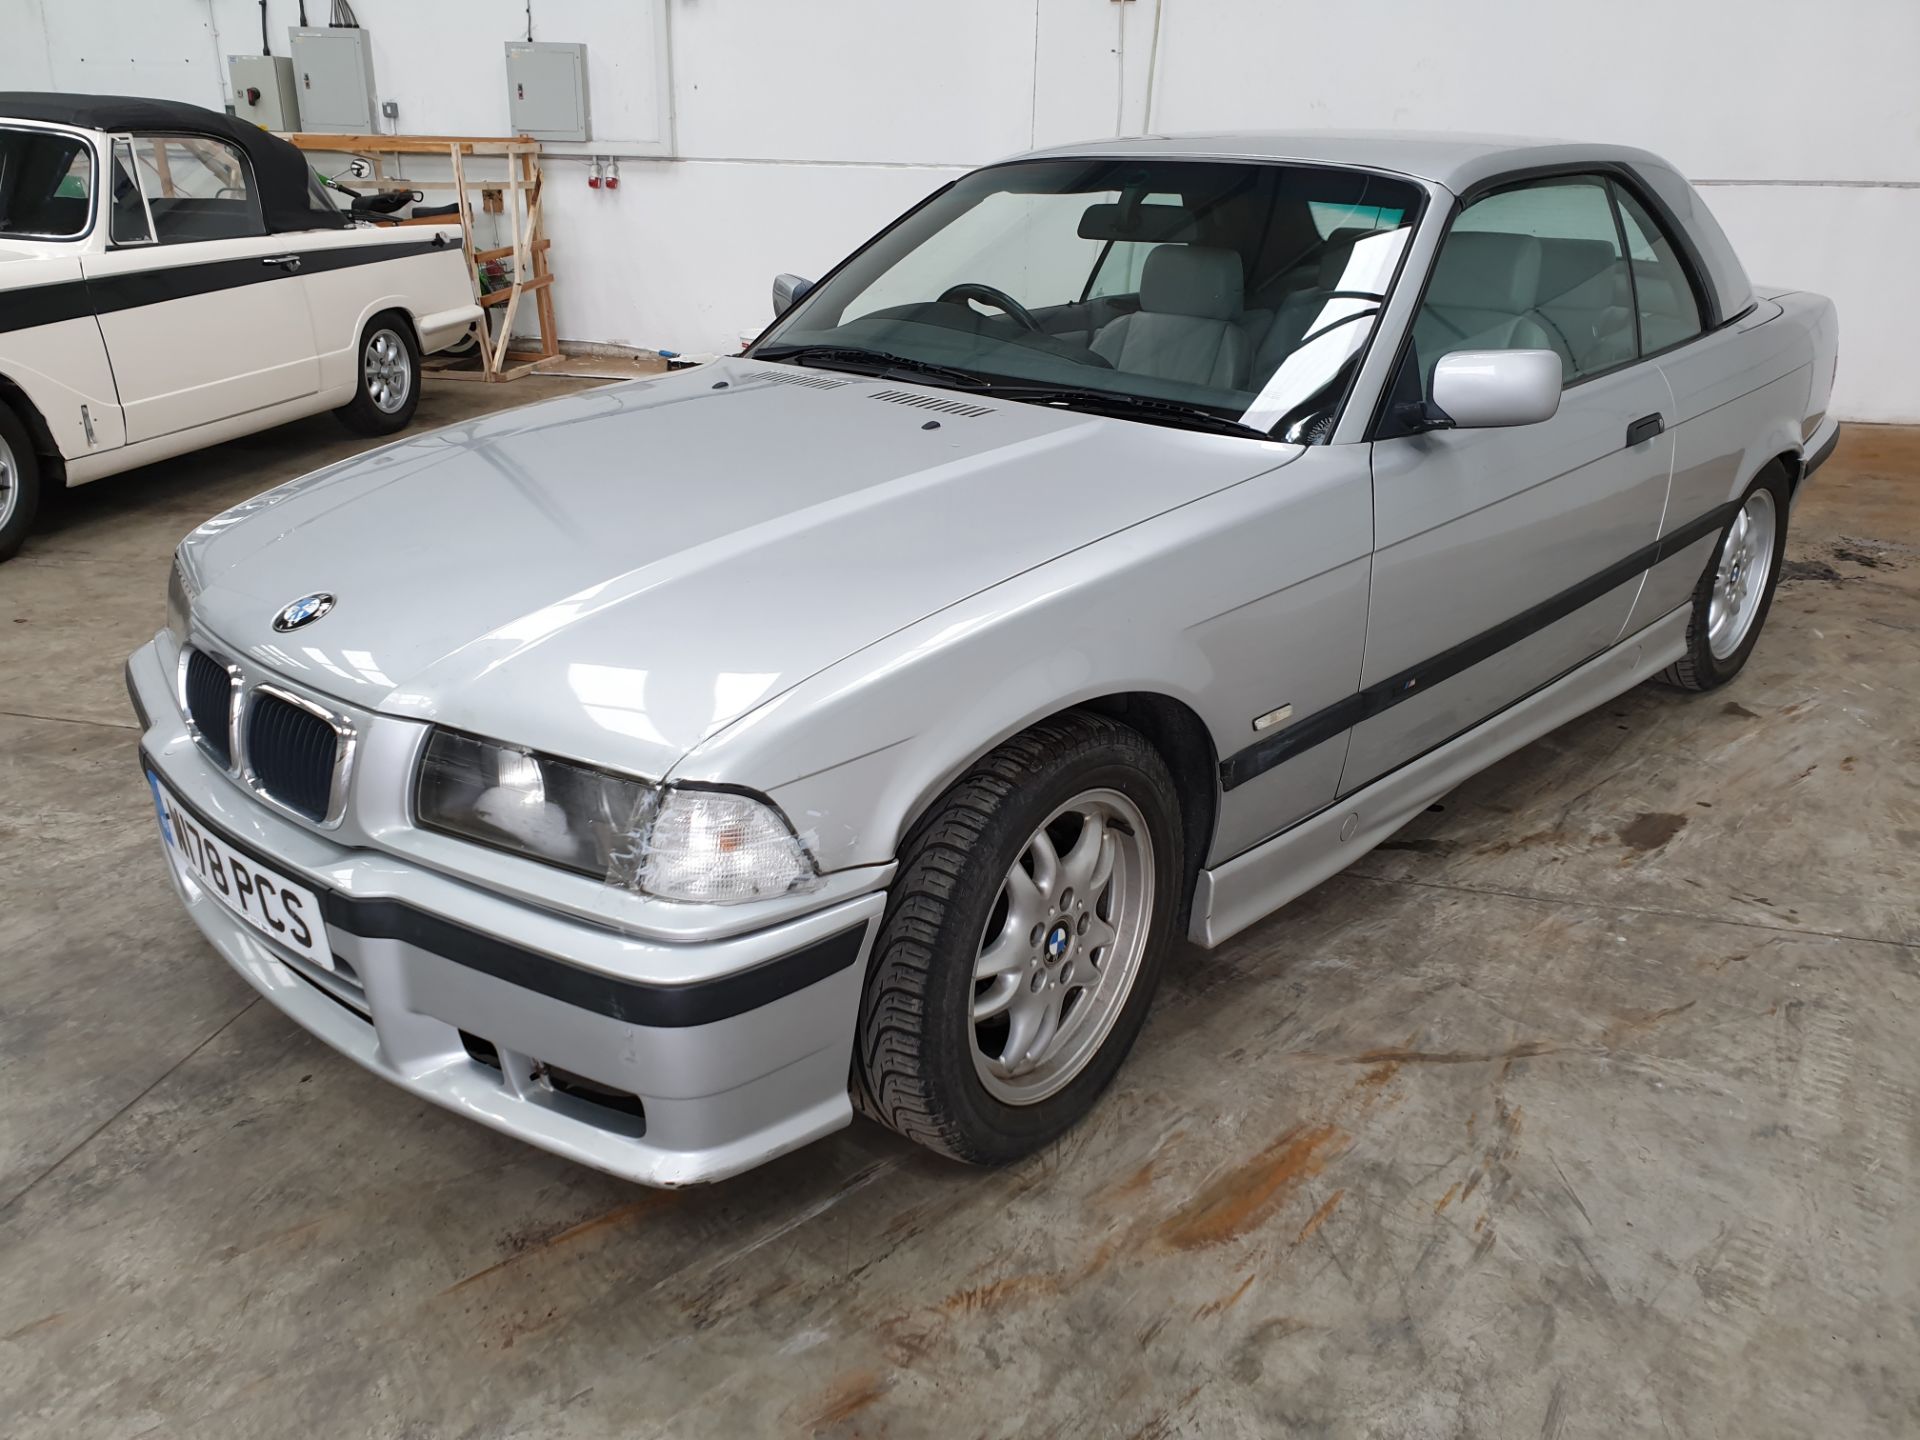 BMW 323 Convertible - Image 7 of 13